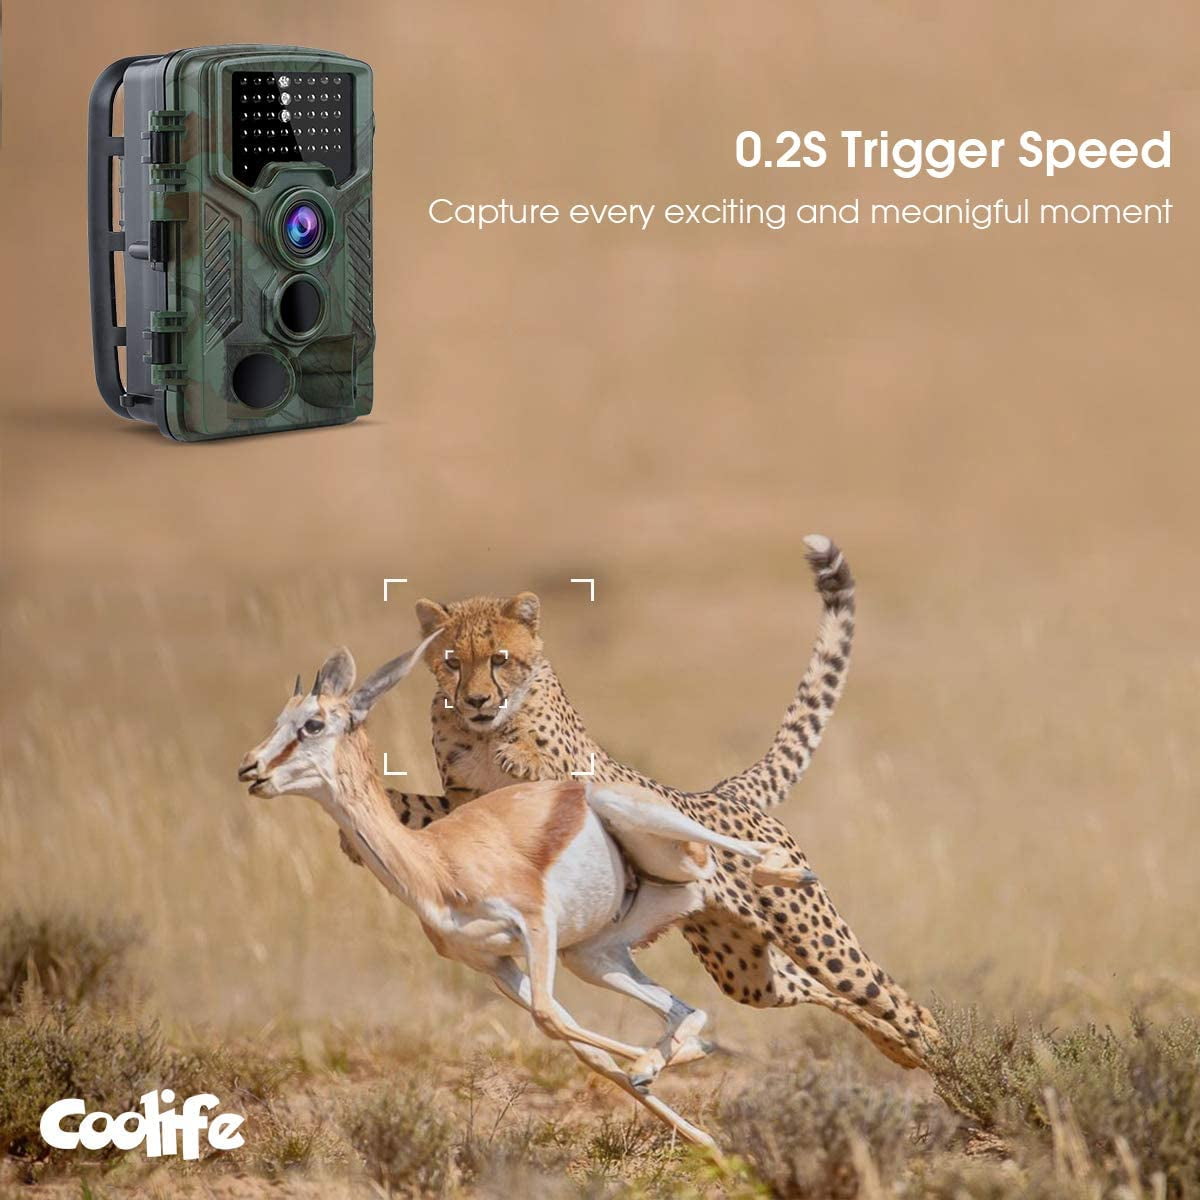 Coolife Trail Game Camera, 21MP 1080P Hunting Wildlife Camera with 3  Infrared Sensors 49Pcs IR LEDs Night Vision 0.2S Motion Activated IP67  Waterproof 